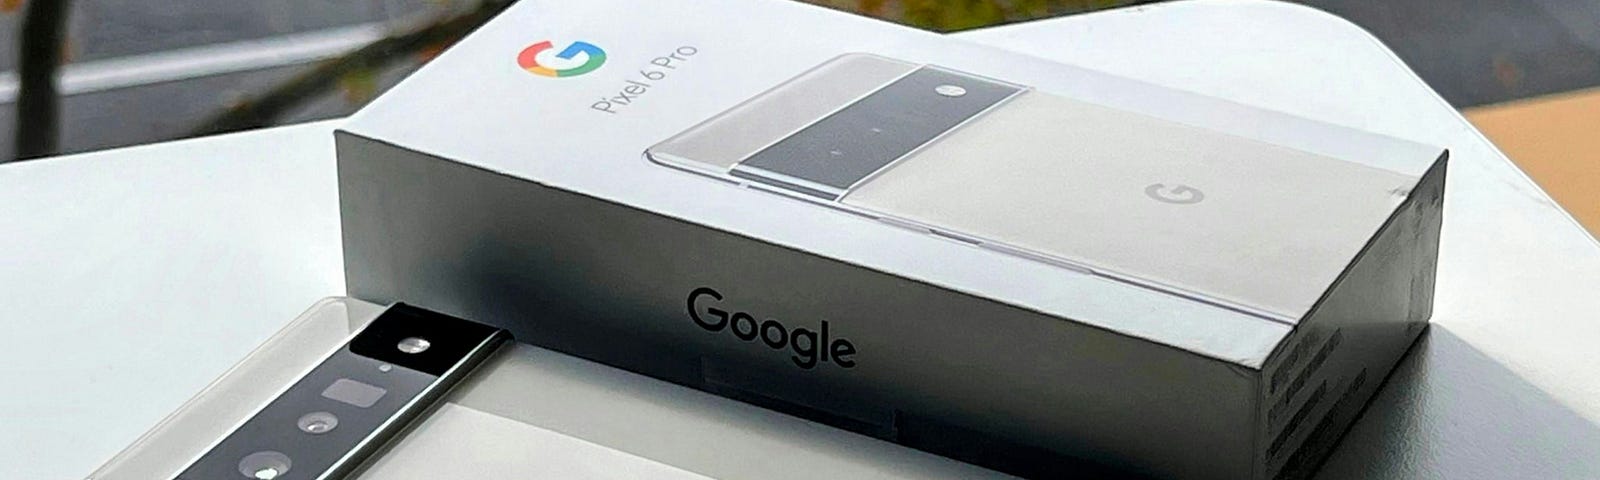 Picture of Pixel 6 Pro next to its package on a table